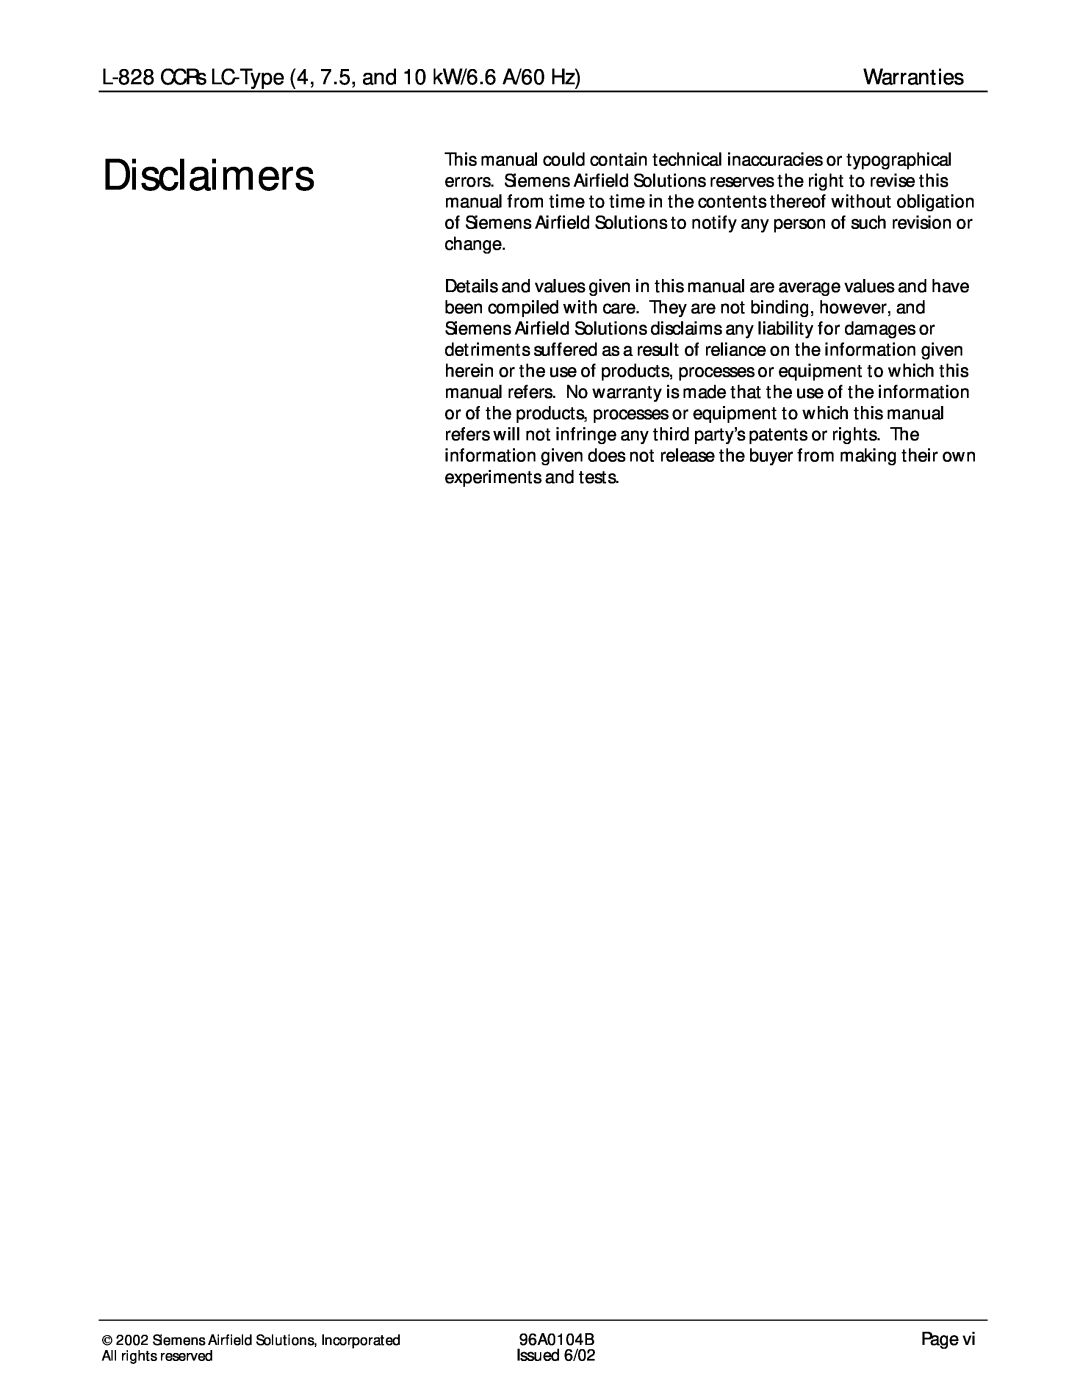 Siemens manual Disclaimers, L-828CCRs LC-Type4, 7.5, and 10 kW/6.6 A/60 Hz, Warranties 